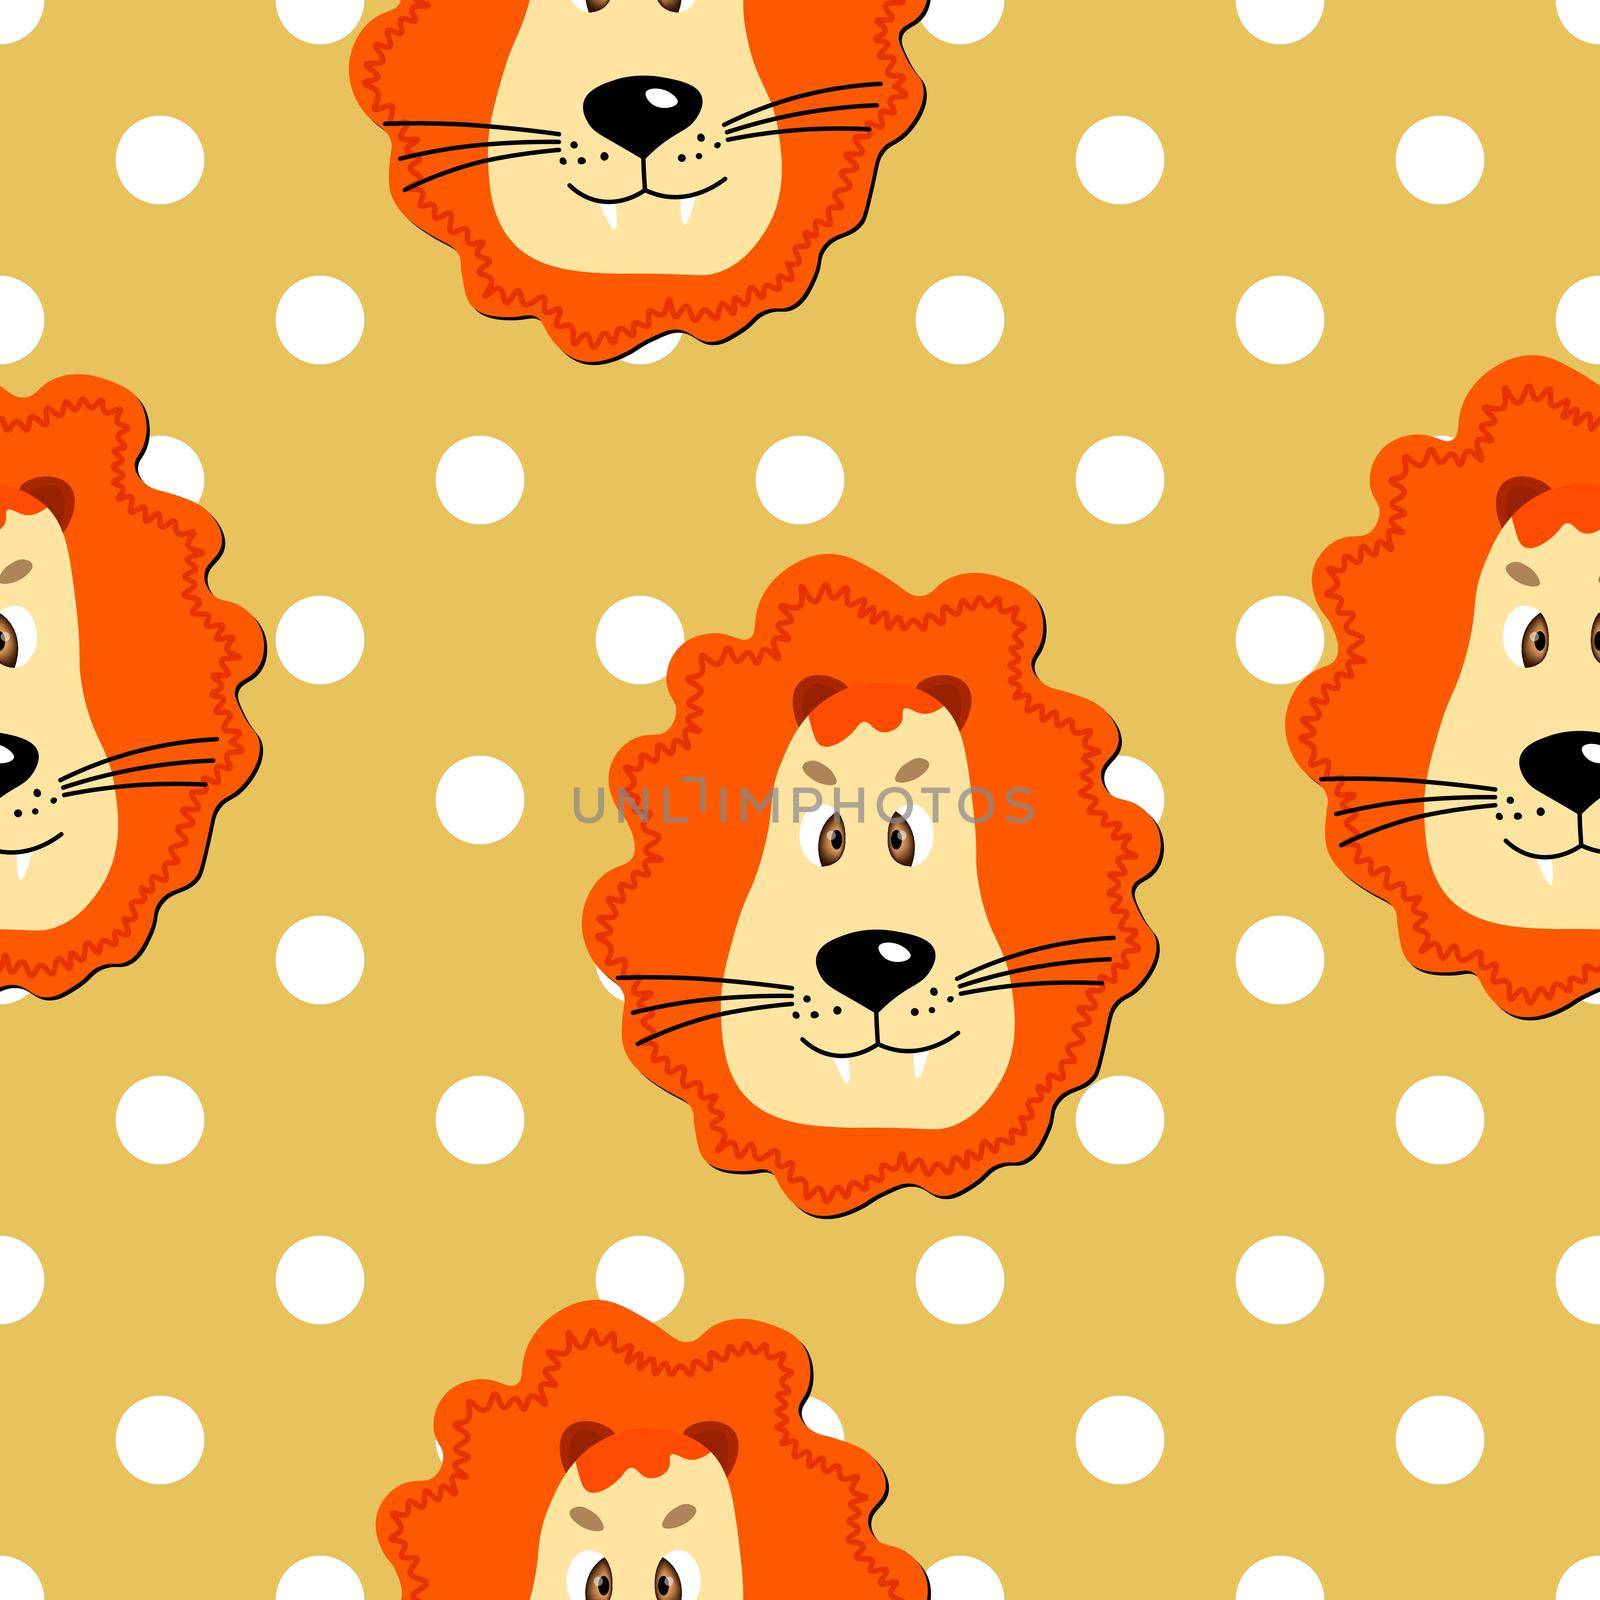 Vector flat animals colorful illustration for kids. Seamless pattern with cute lion face on yellow polka dots background. Adorable cartoon character.Design for textures, card, poster, fabric, textile. by allaku